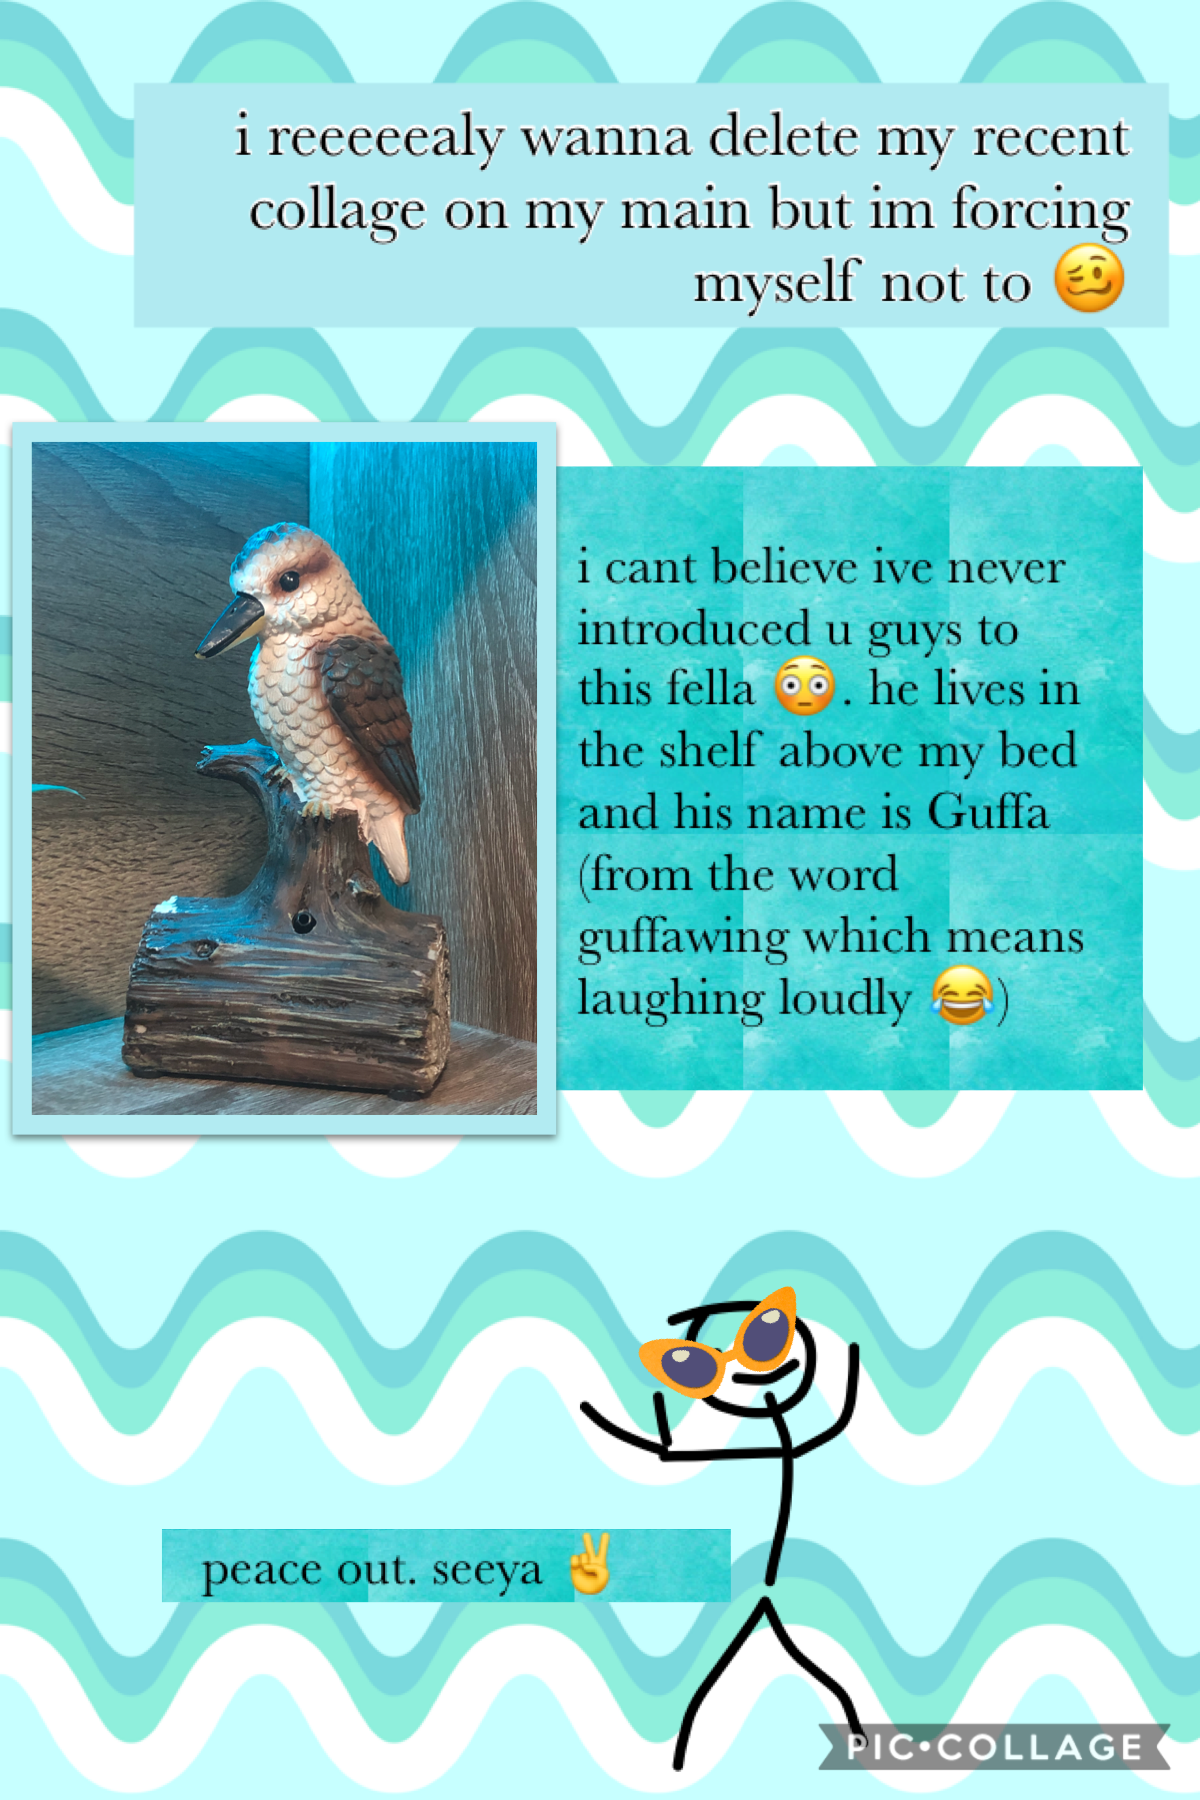 if you have a better name for my kookaburra pls comment it 😶

have a good saturday/friday everyone. i’m still in bed 🪀